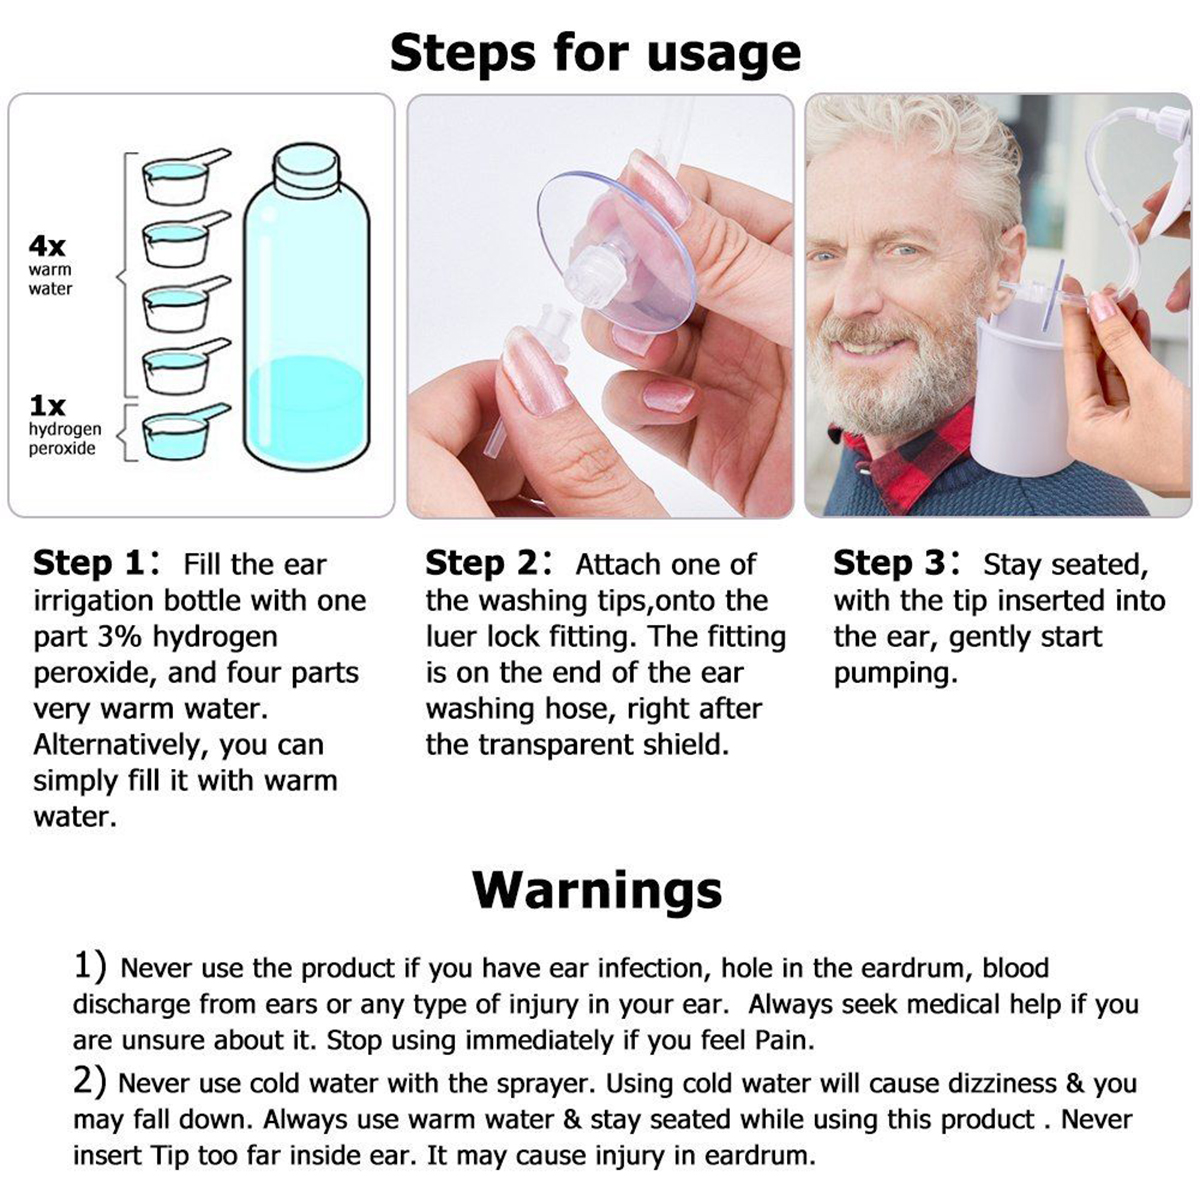 Ear-Wax-Removal-Kit-Ear-Irrigation-Ear-Washer-Bottles-System-For-Ear-Cleaning-Tools-Set--5-Tips-1406121-4